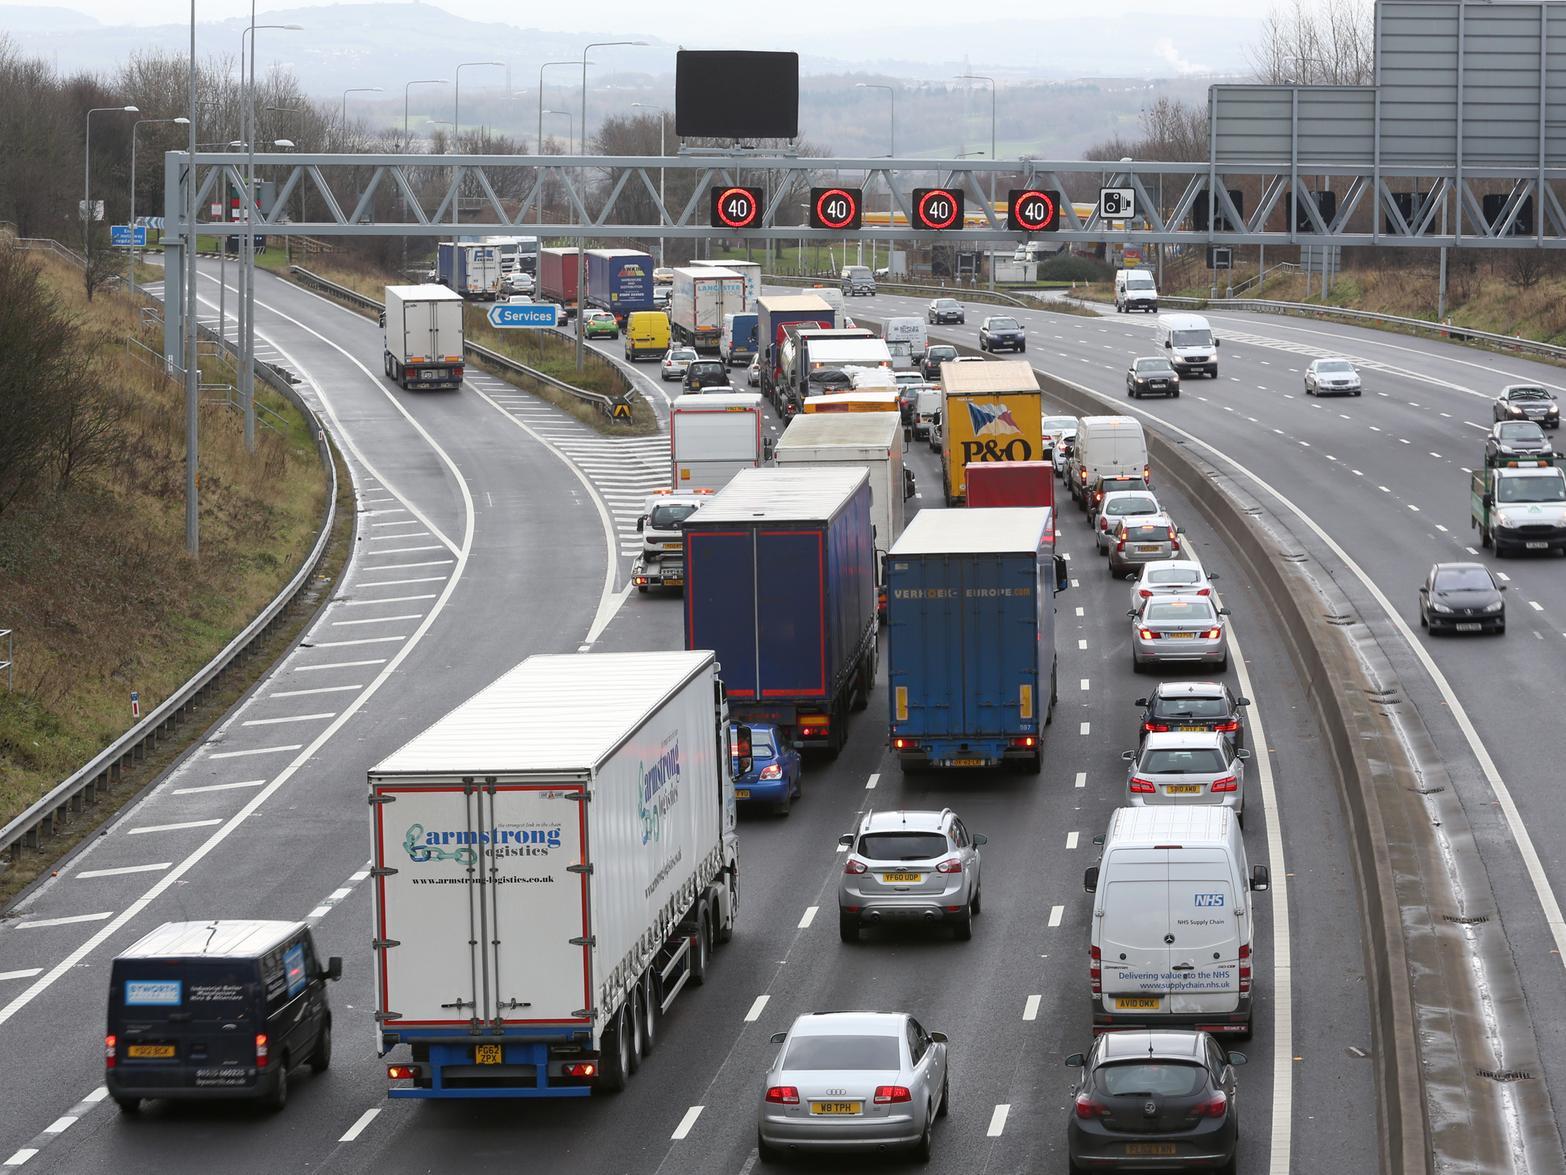 A police officer was hit by a car while helping a broken down van driver on the M62.